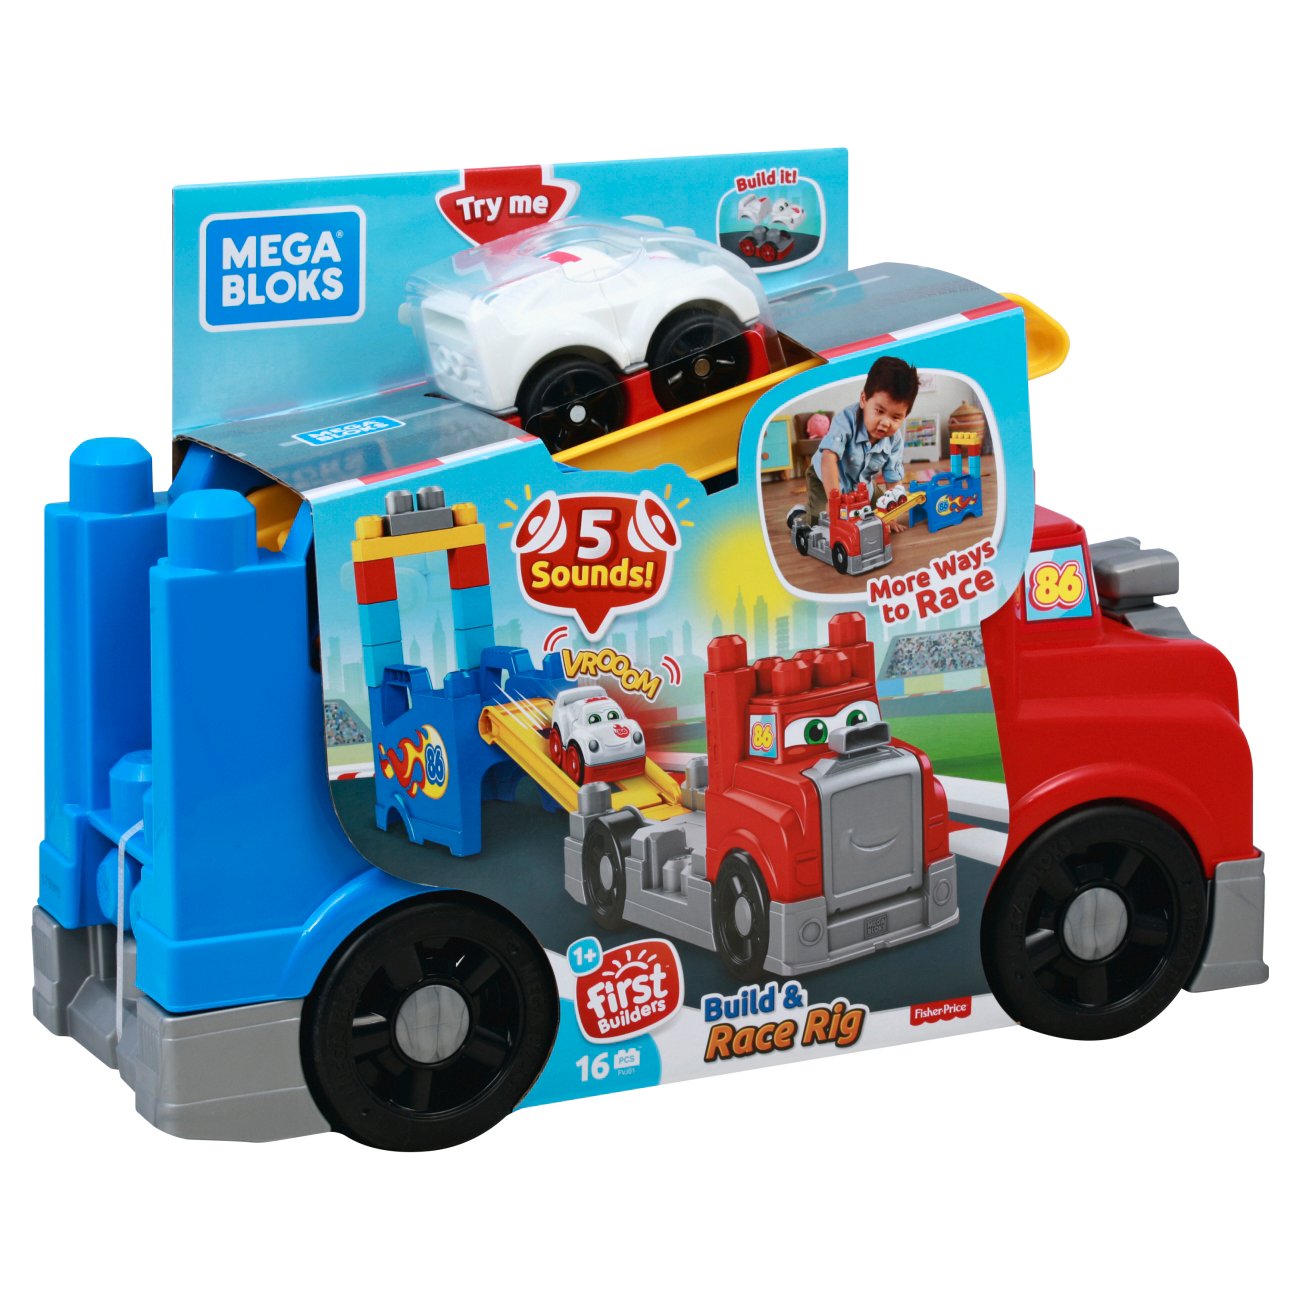 Build & Race Rig New Toy Details about   MEGA Brands Brick Toy 